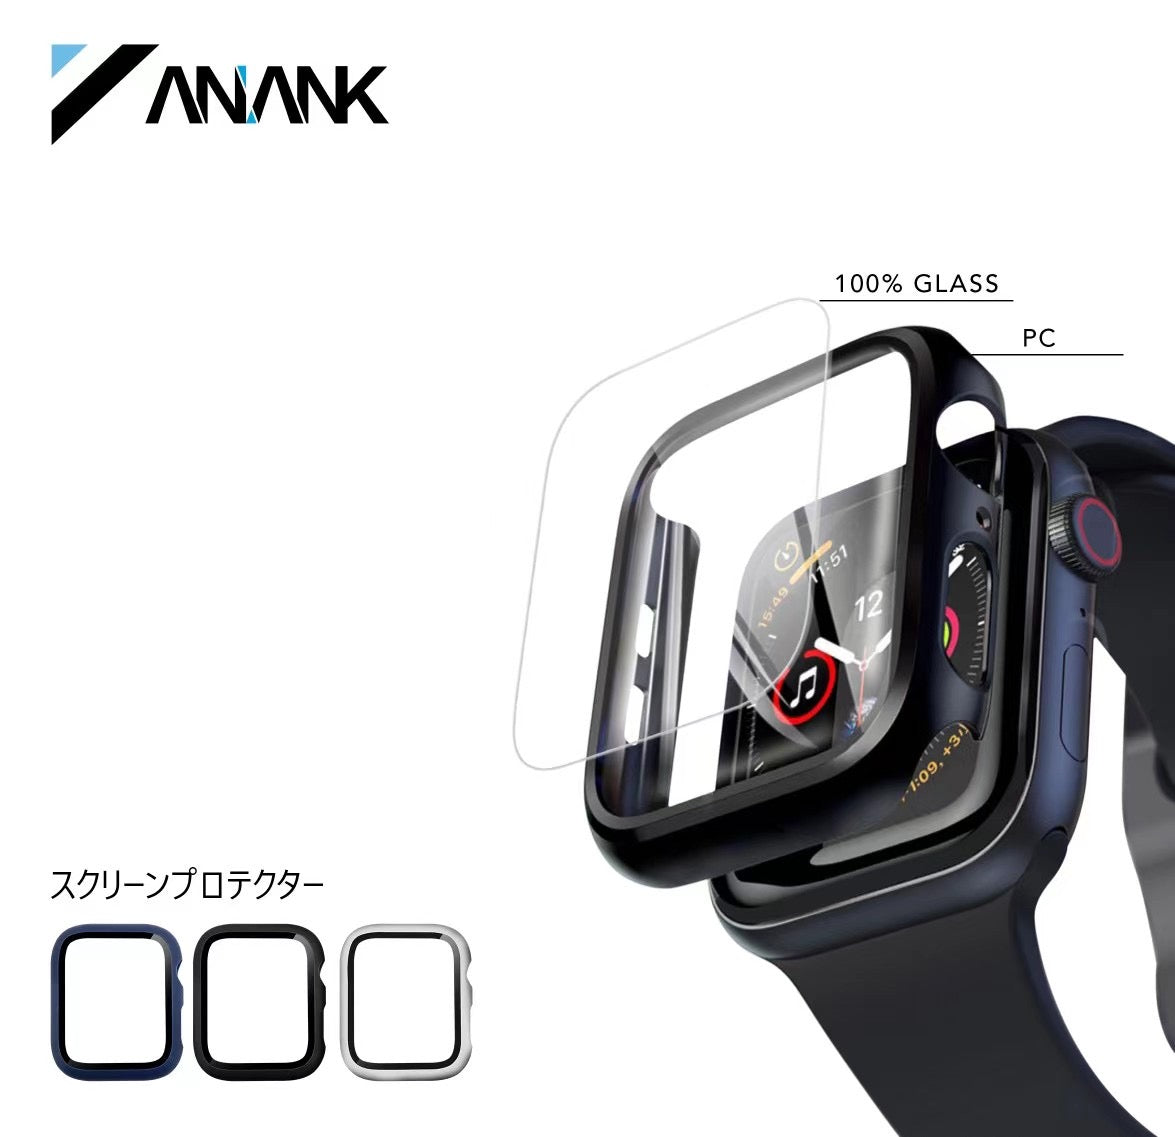 ANANK PC Bumper + Tempered Glass Screen Protector Guard for Apple Watch